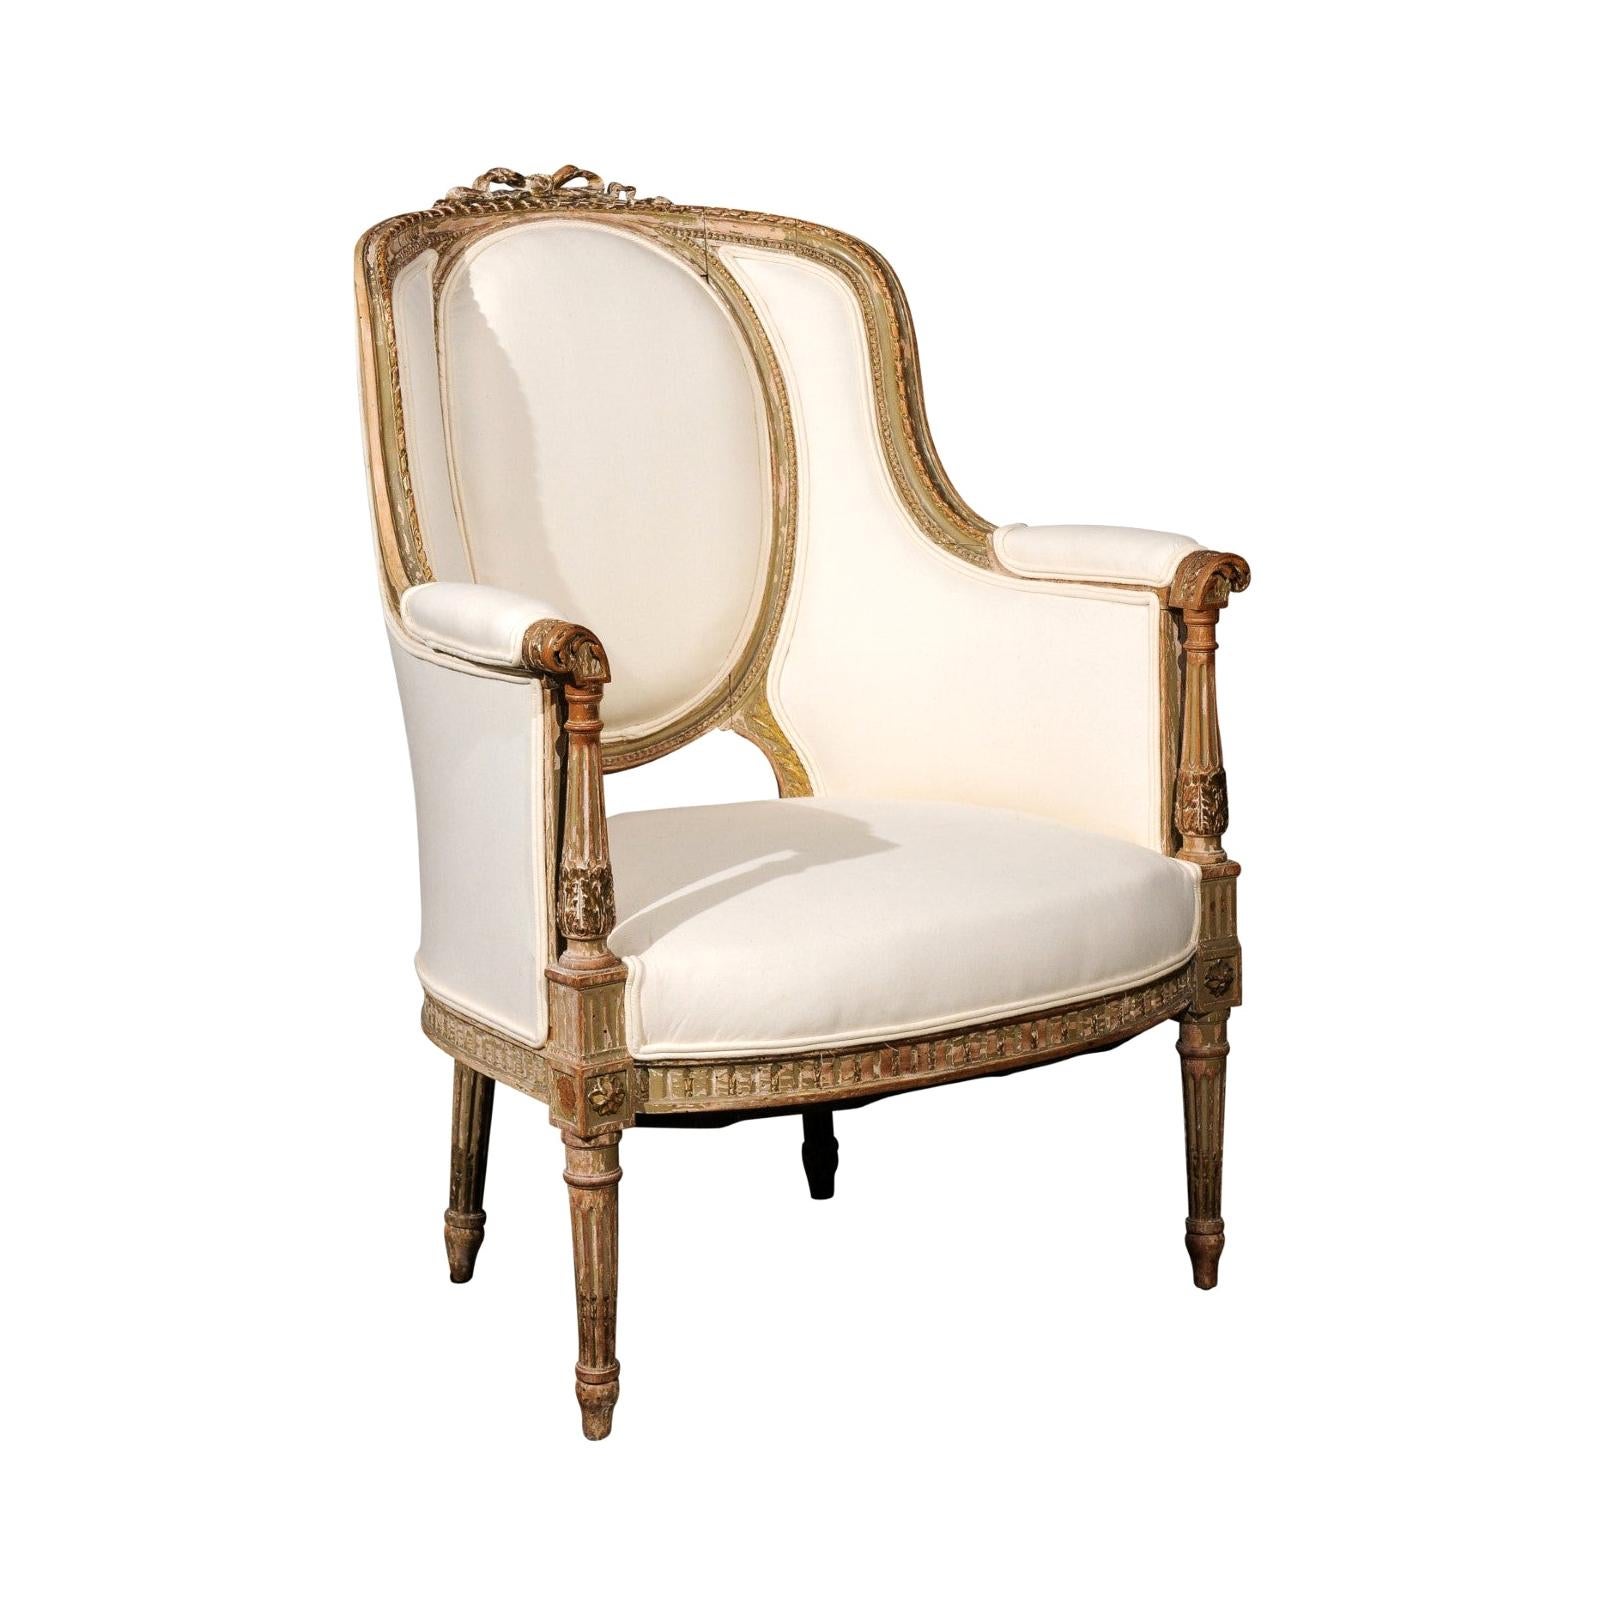 French Louis XVI Style 19th Century Bergère Chair with Distressed Finish